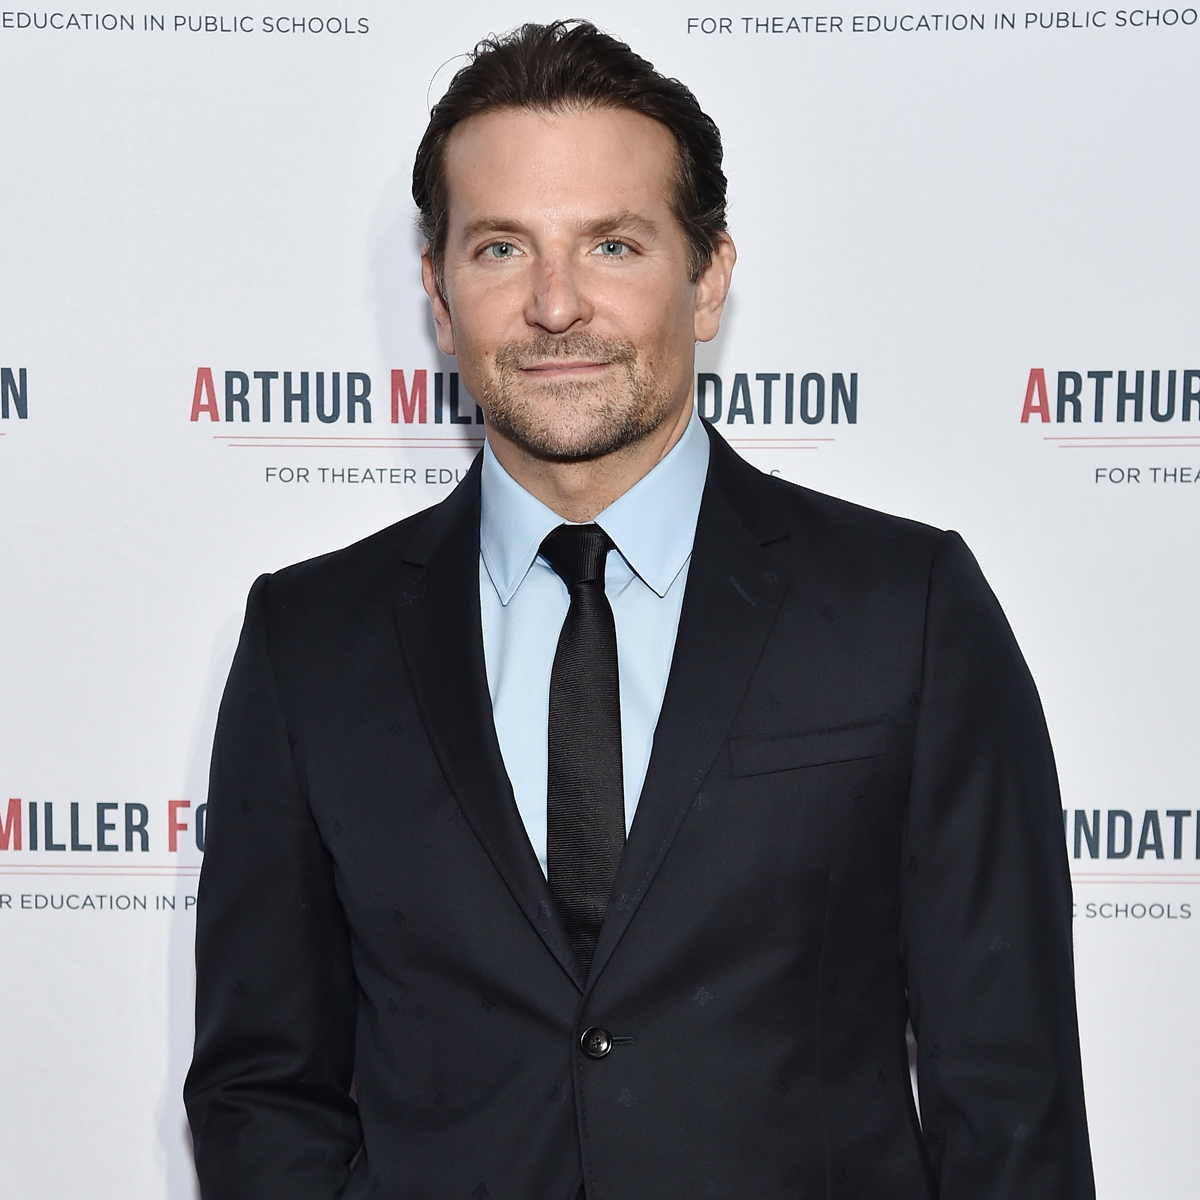 Bradley Cooper opens up about his past addiction and how his celeb